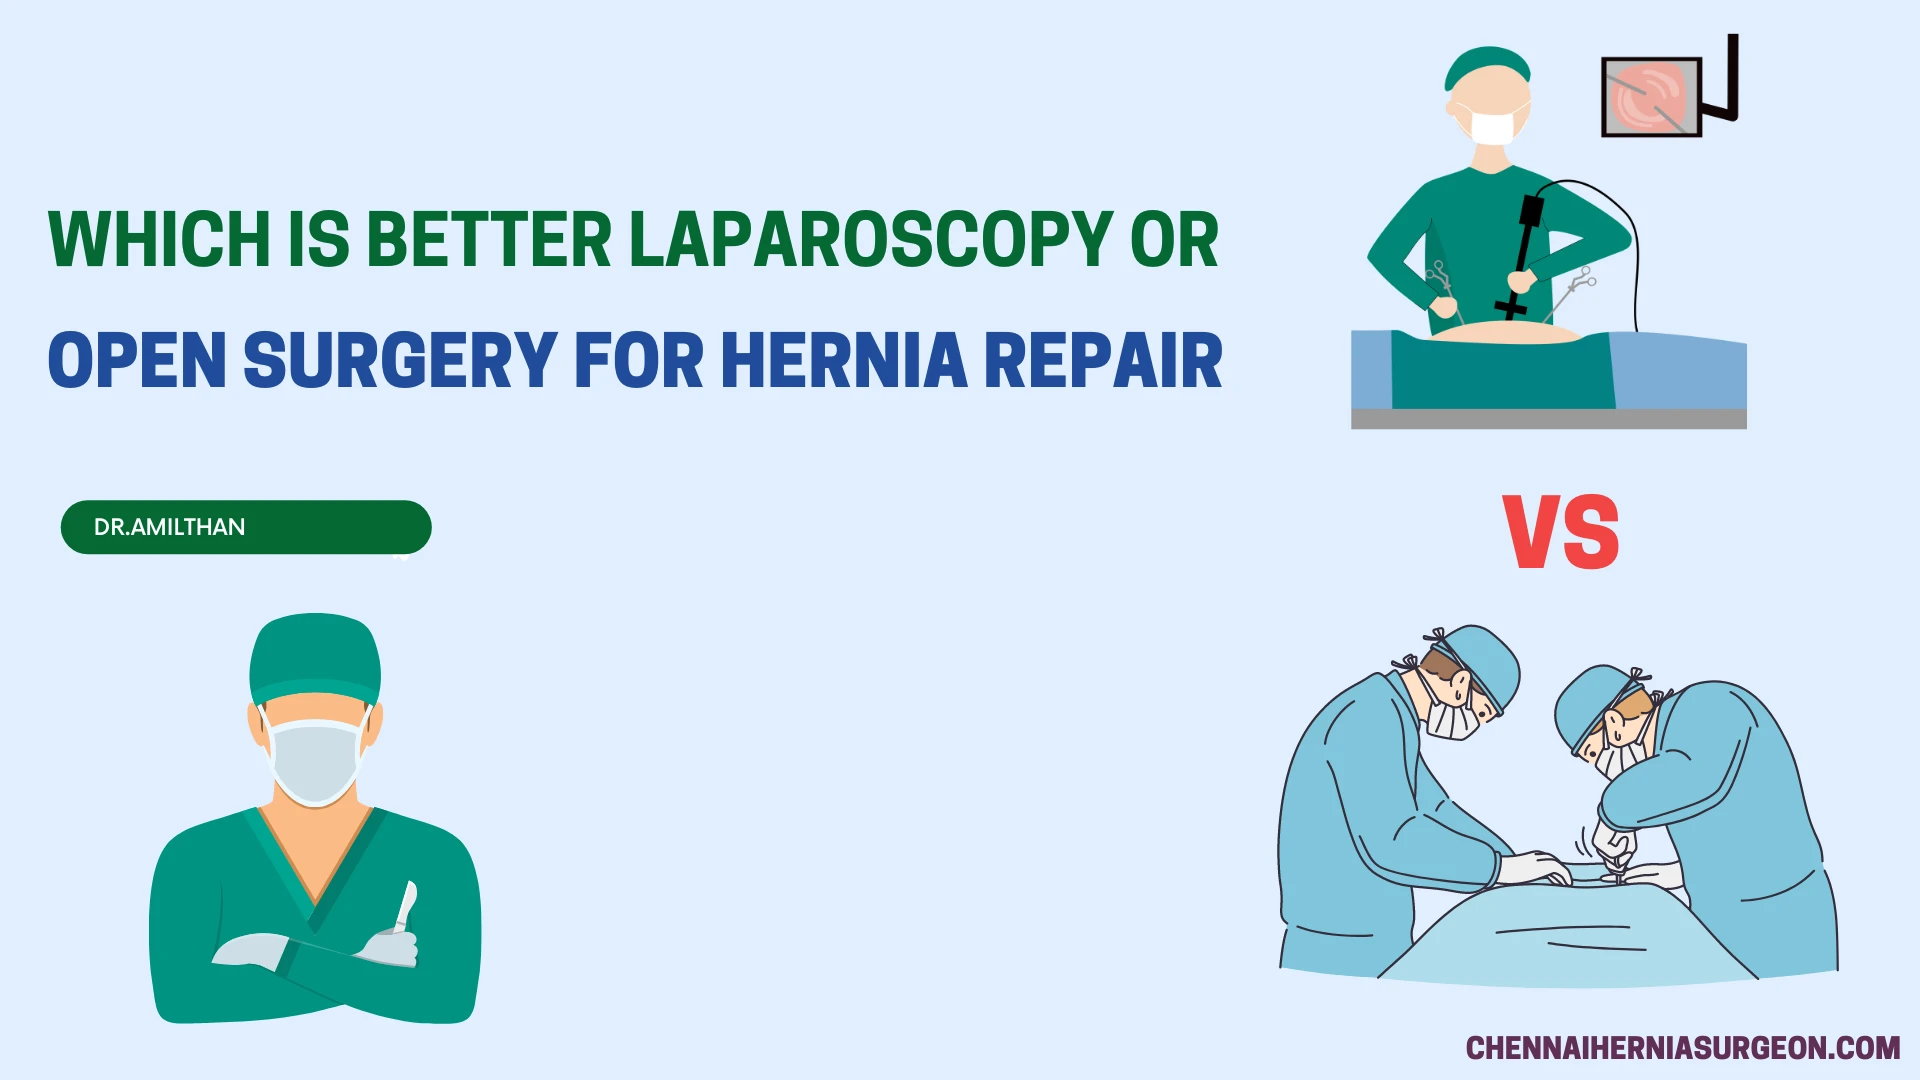 Which is Better Laparoscopy or Open Surgery for Hernia Repair